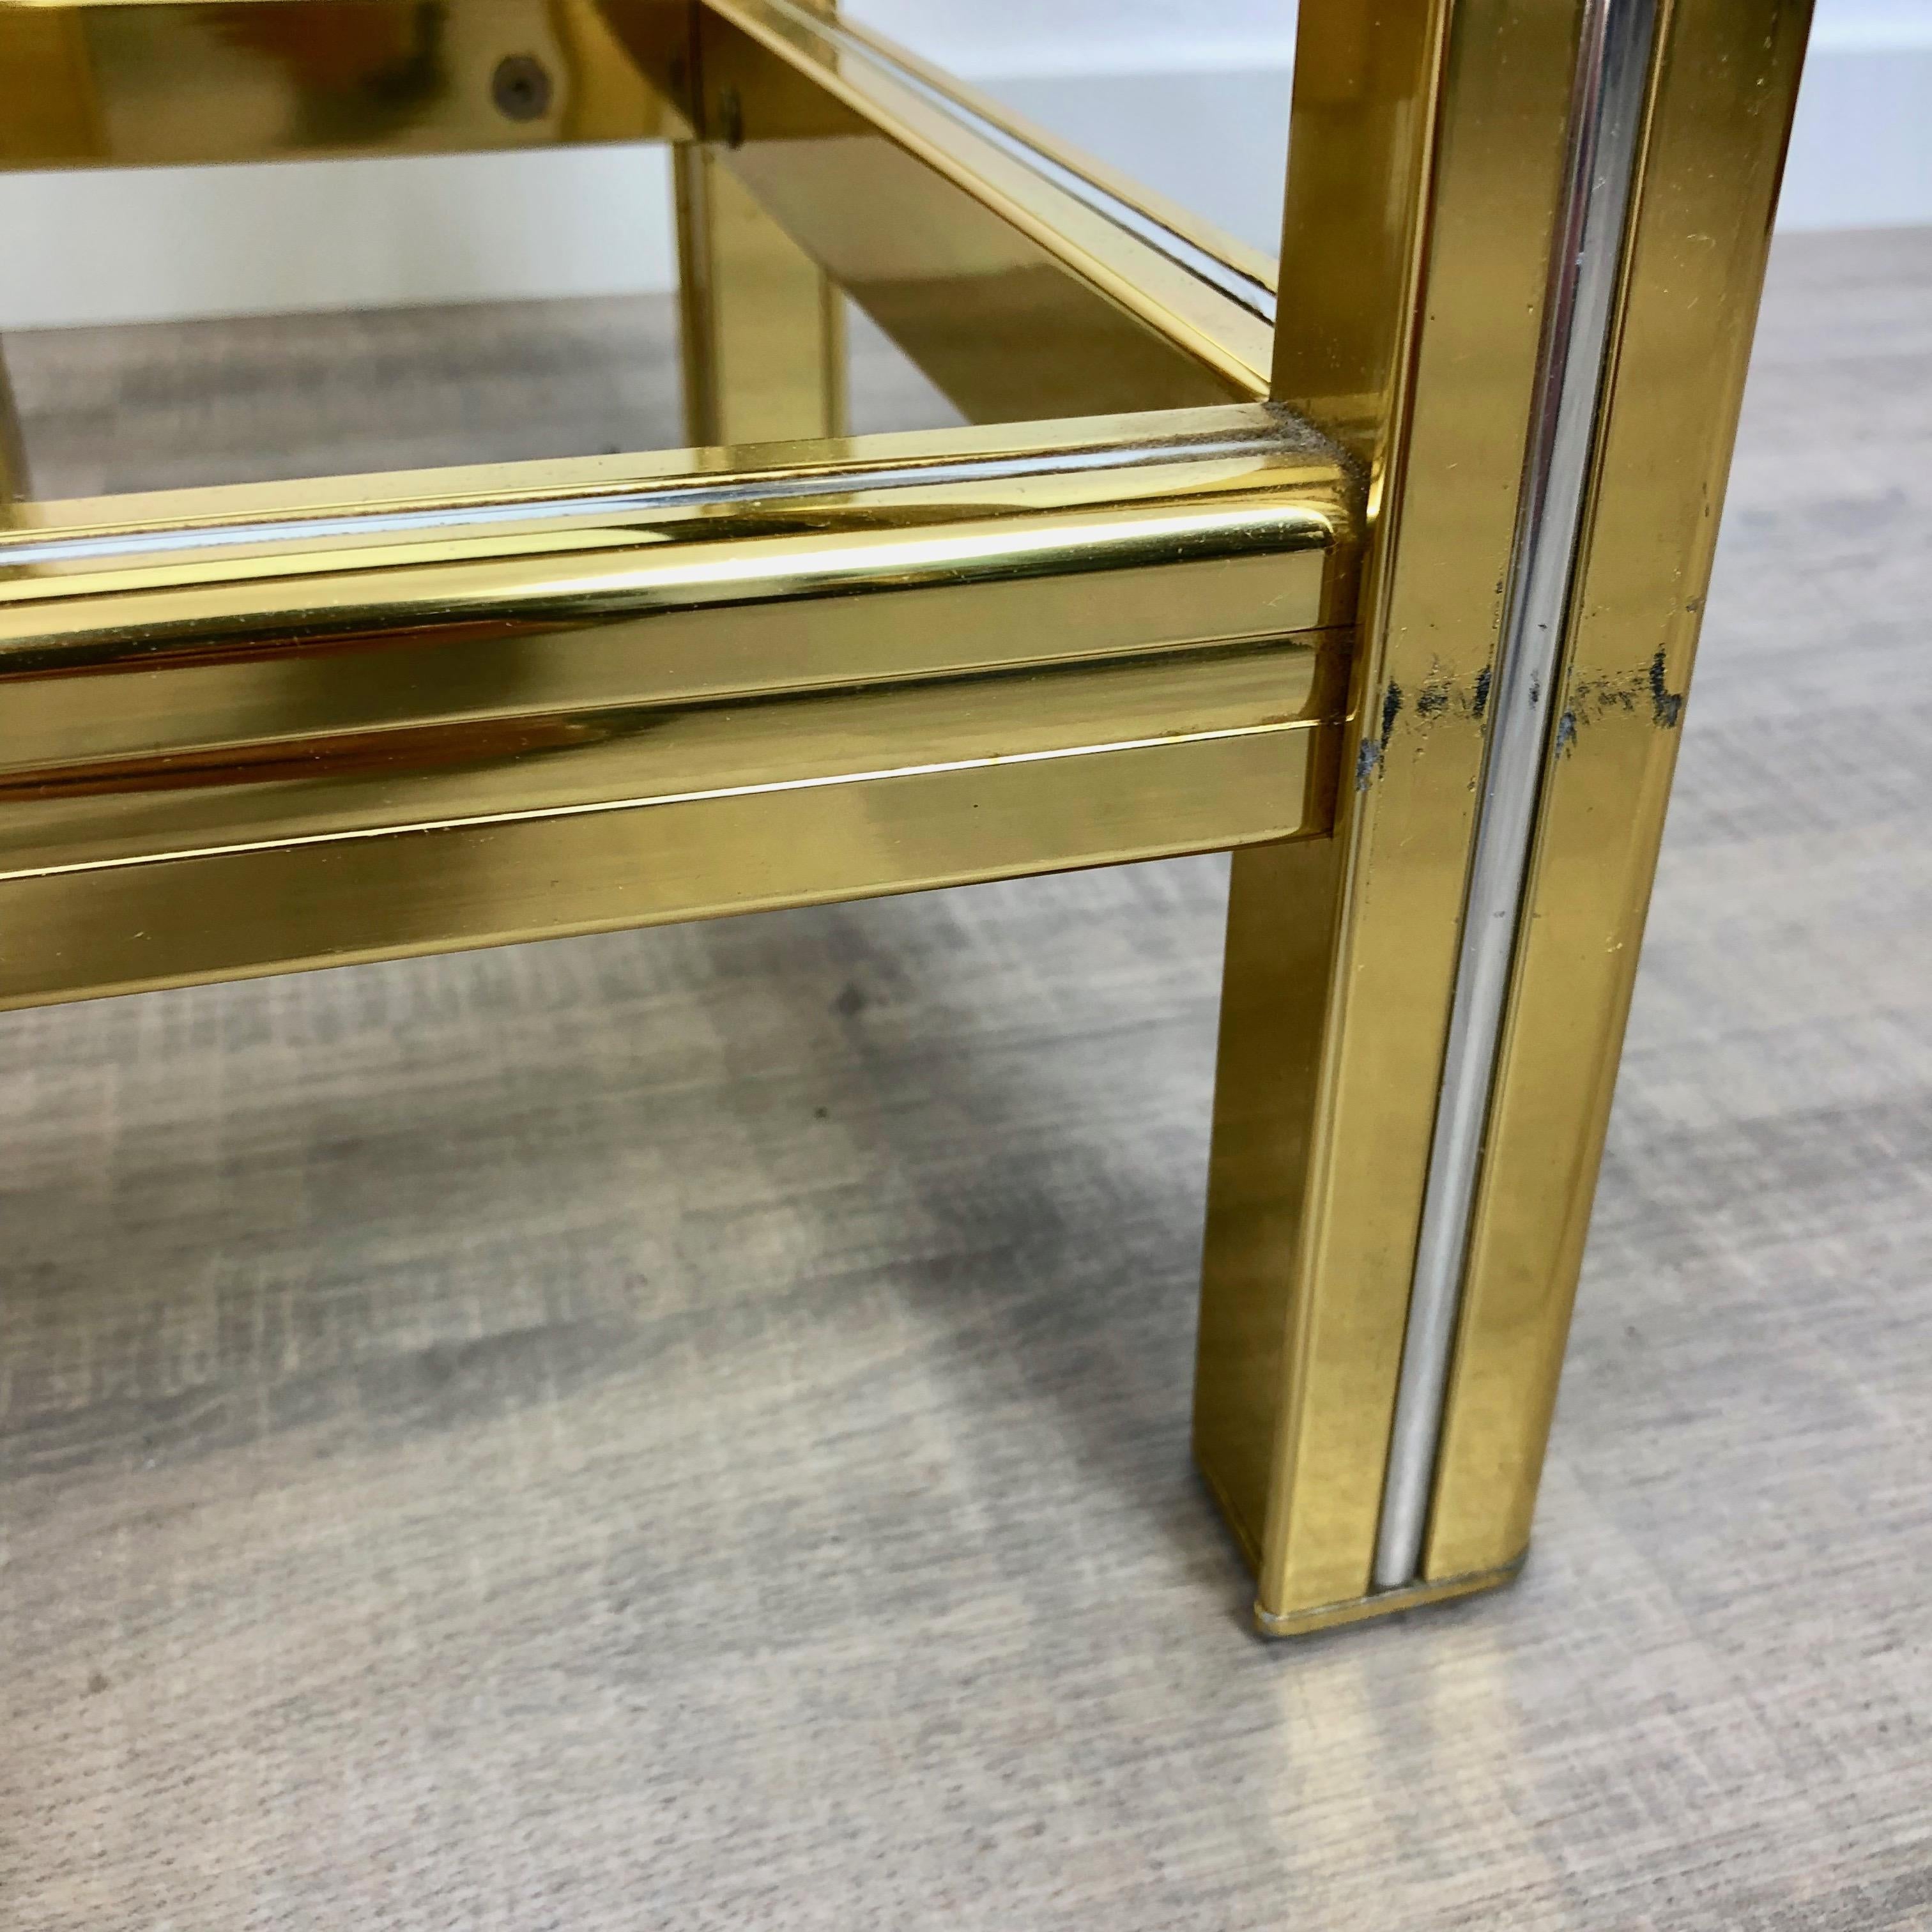 Tris of Increasing Dimensions Side Coffe Table in Brass, Glass and Chrome, 1970s For Sale 4